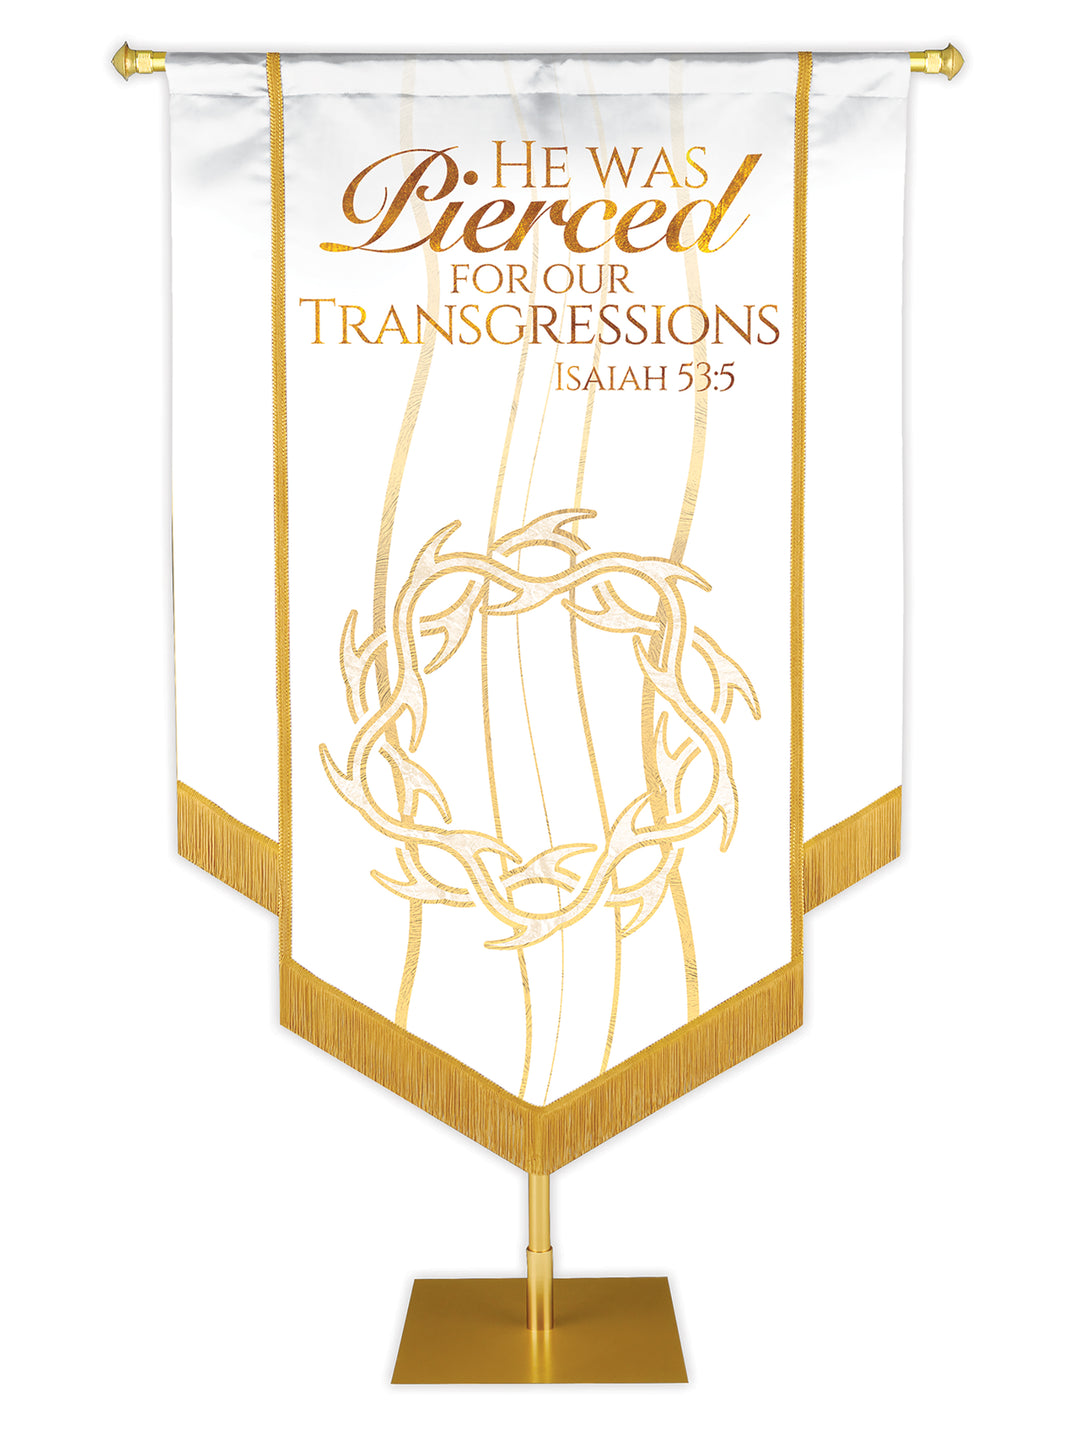 Experiencing God Crown of Thorns, He Was Pierced Embellished Banner - Handcrafted Banners - PraiseBanners